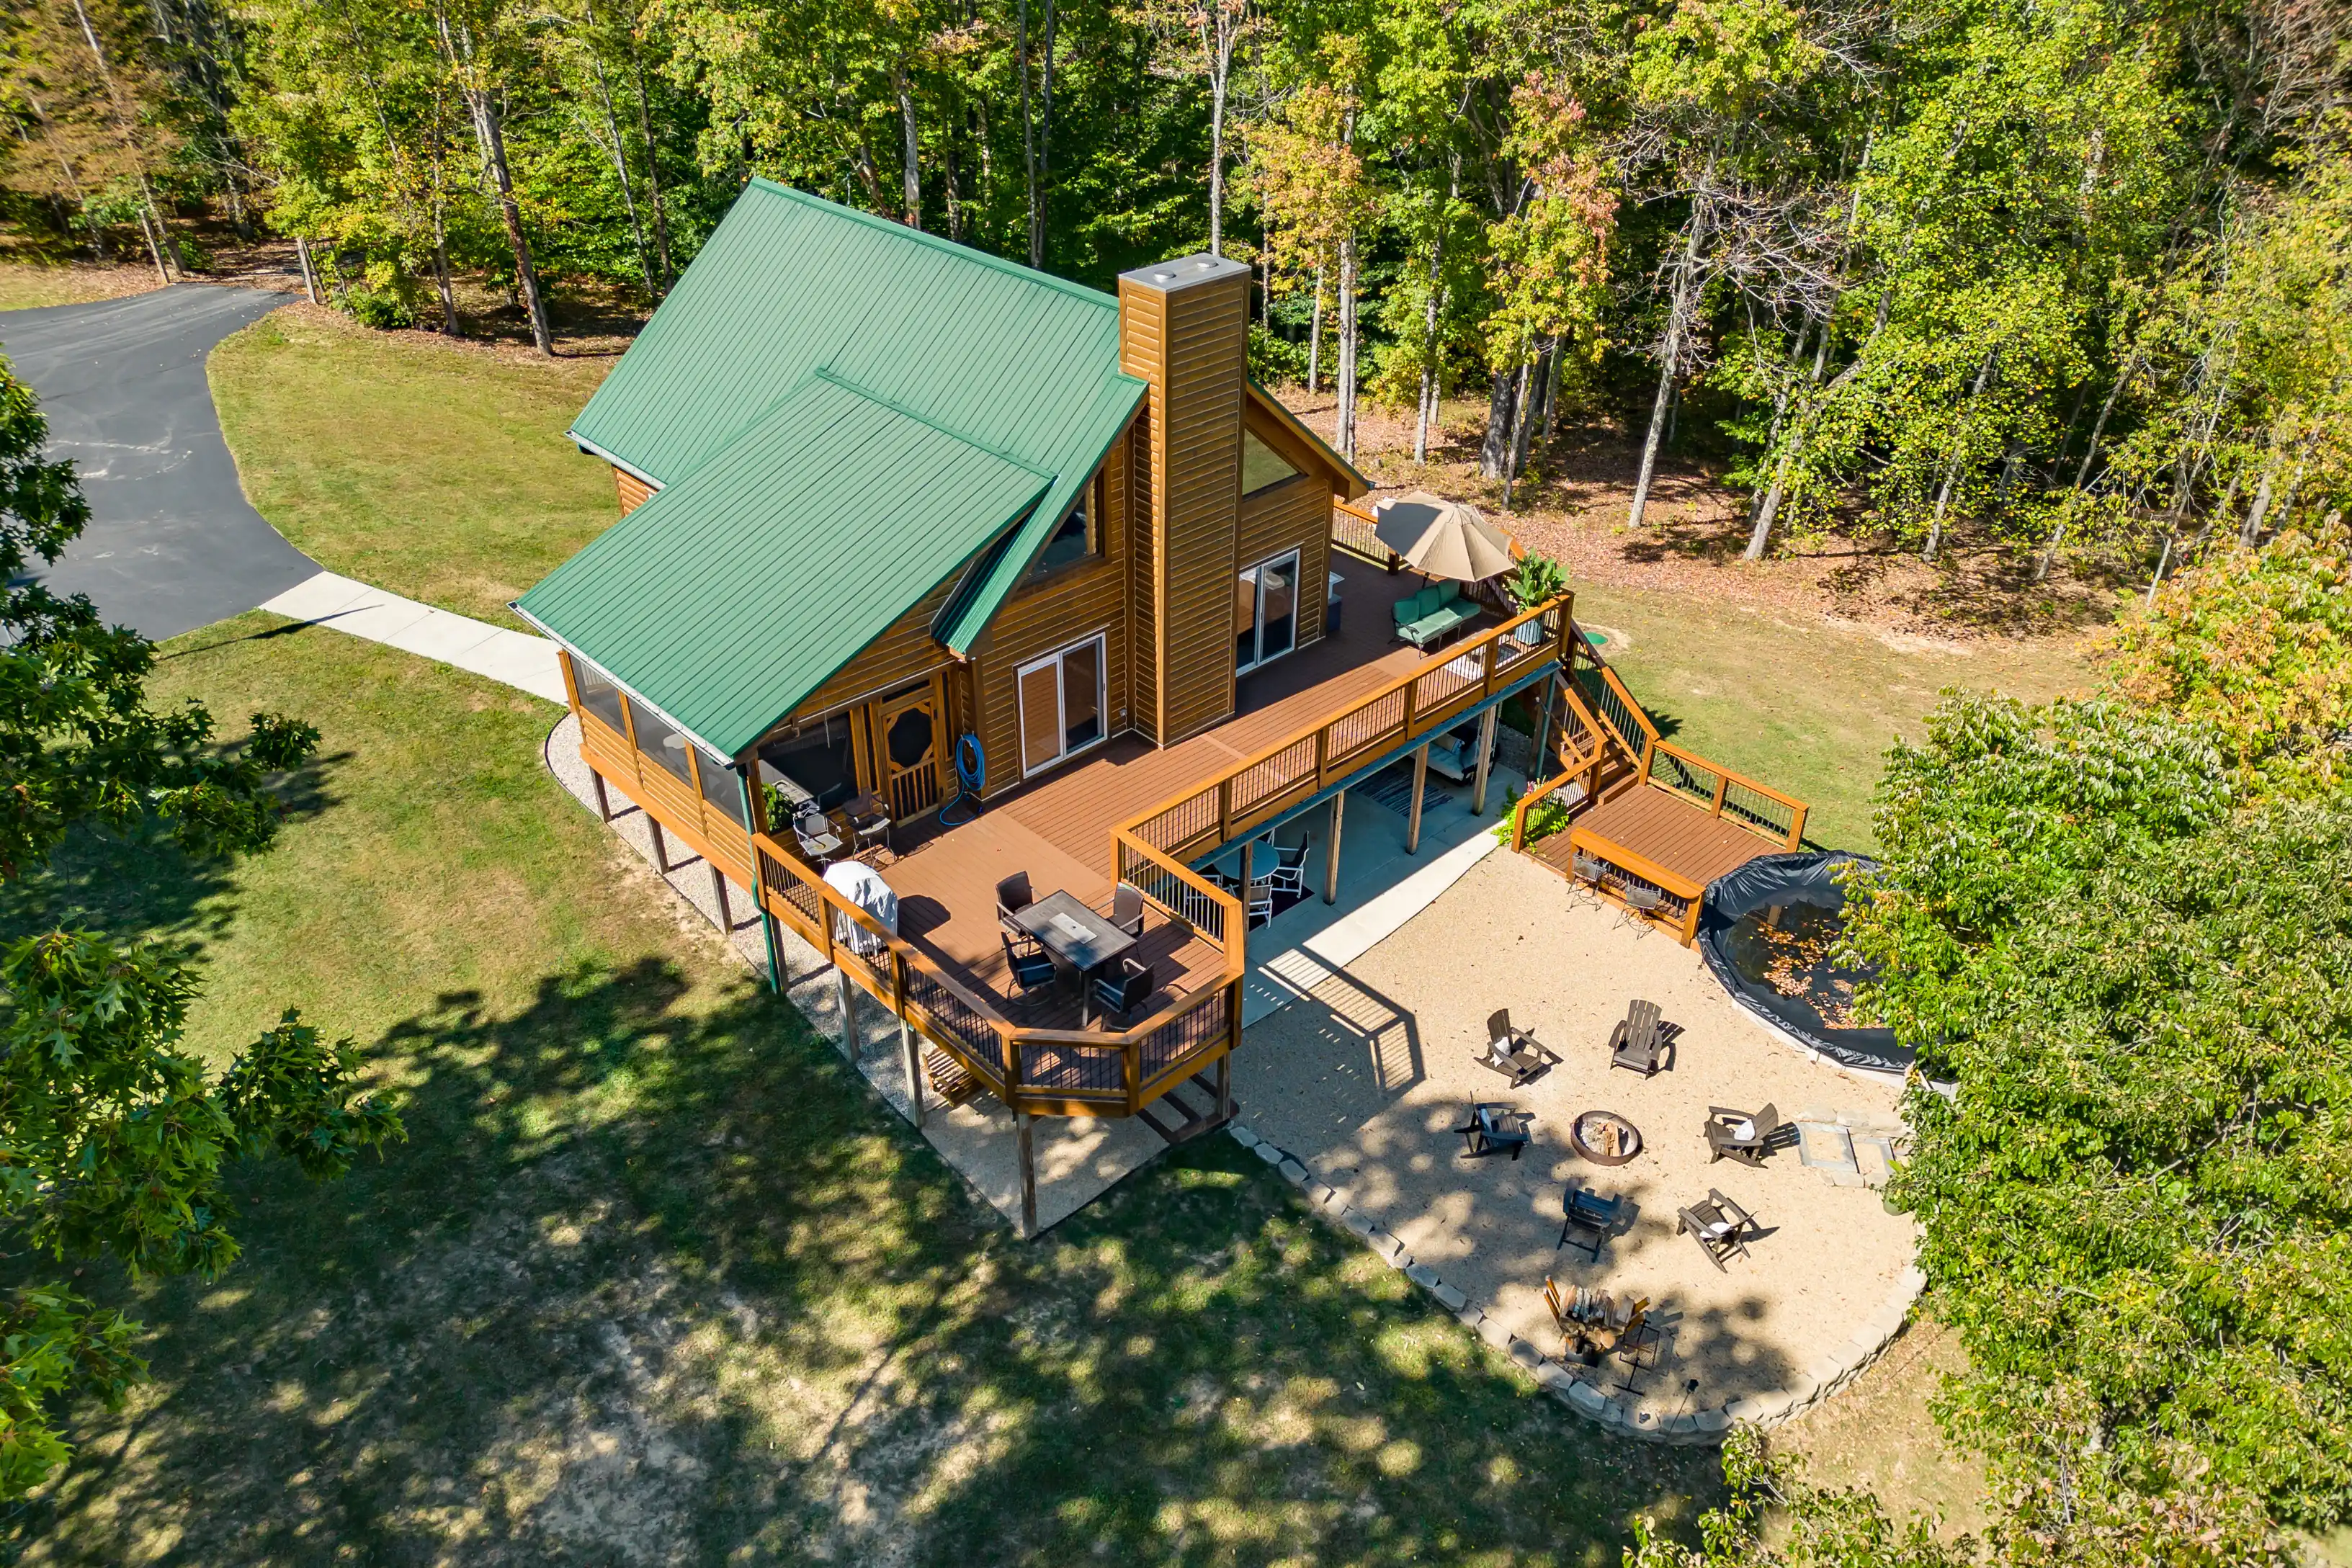 Aerial view of a two-story cabin with a green roof and large deck, surrounded by trees with a fire pit area and trampoline in the backyard.